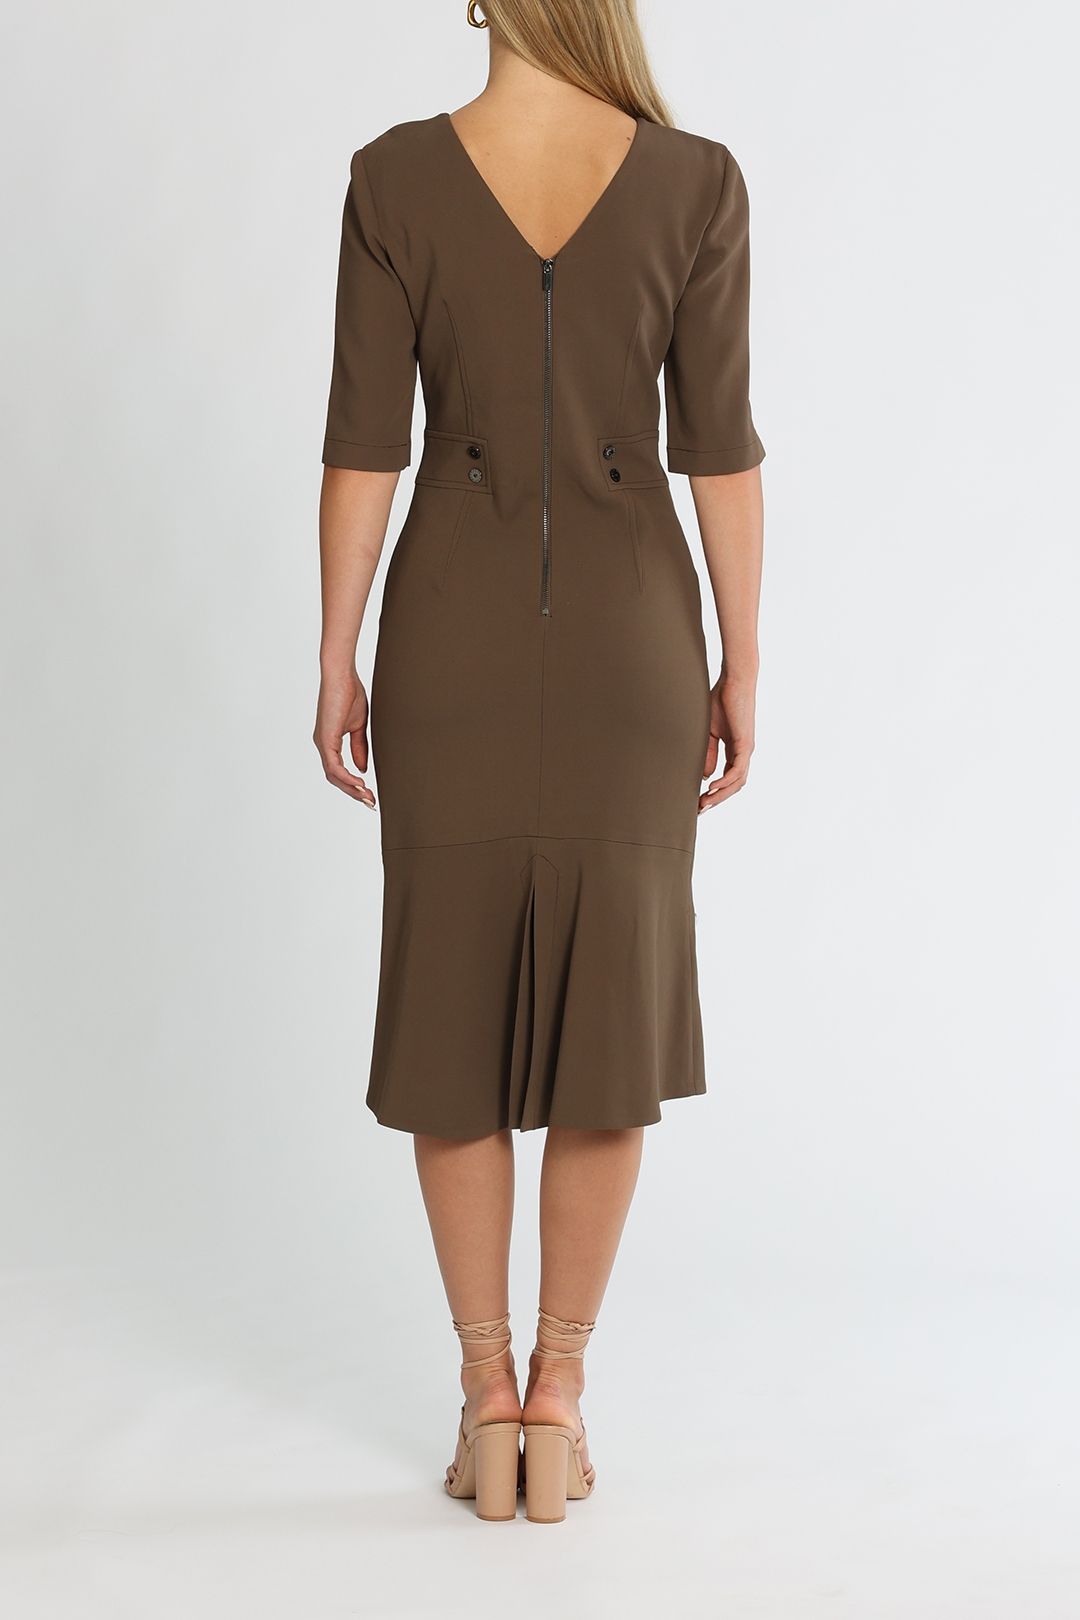 Ginger and Smart Structured Dress Tobacco Peplum